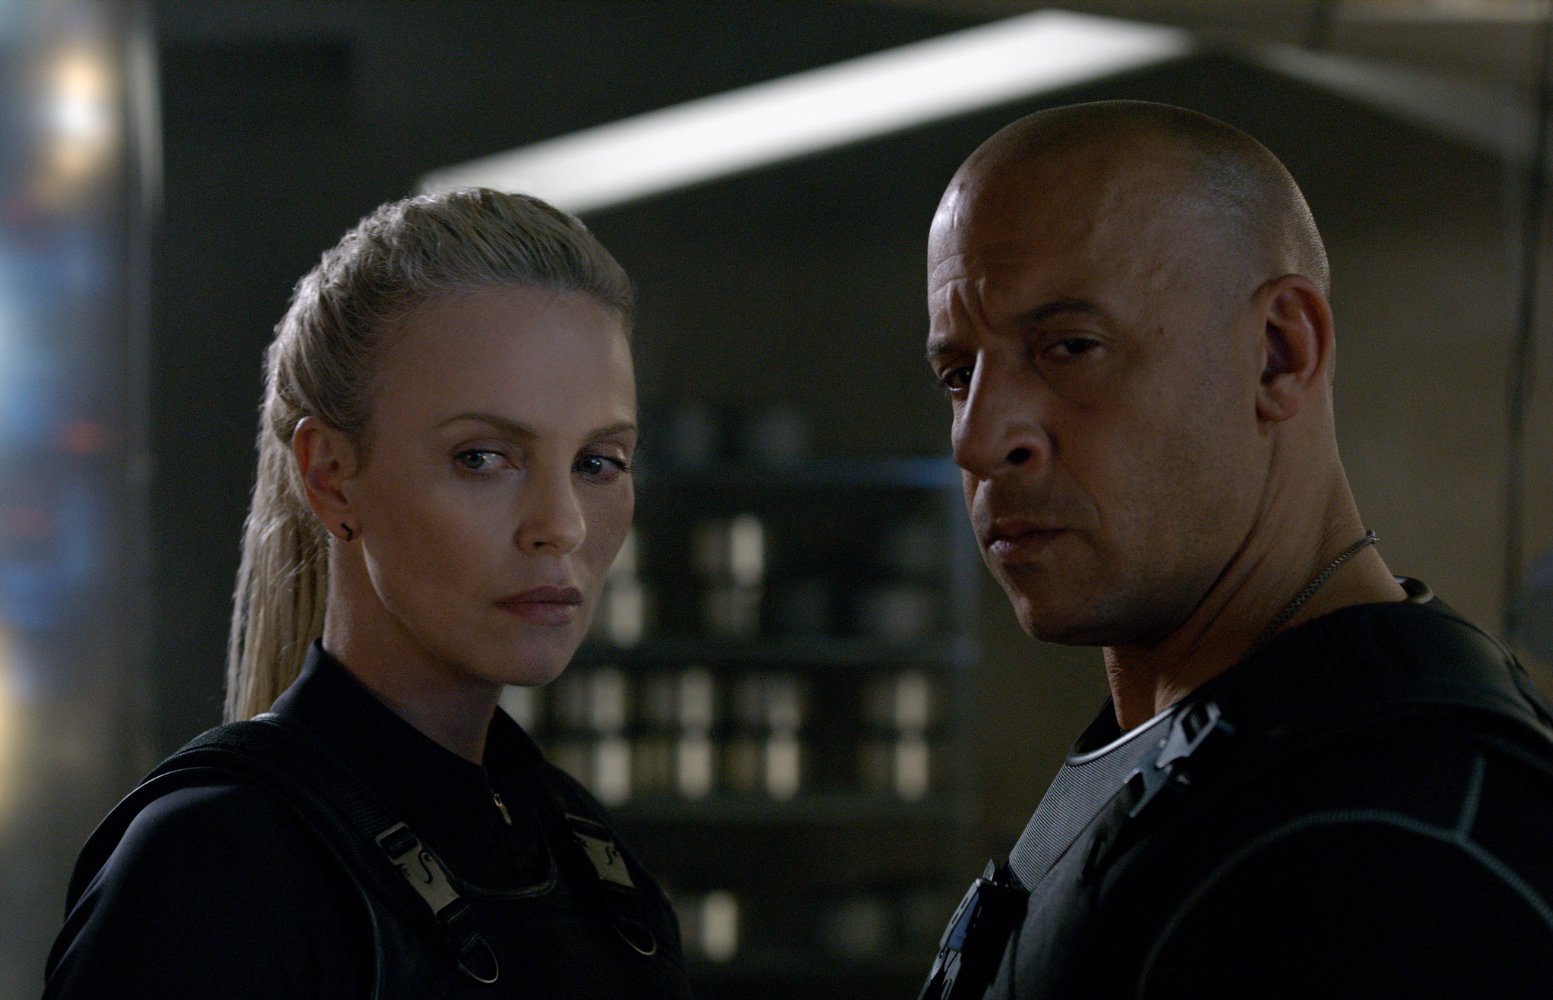 11. The Fate of the Furious (2016)

Worldwide Gross: $1,235,761,498

Opening Weekend: $98,786,705

Production Budget: $250 million